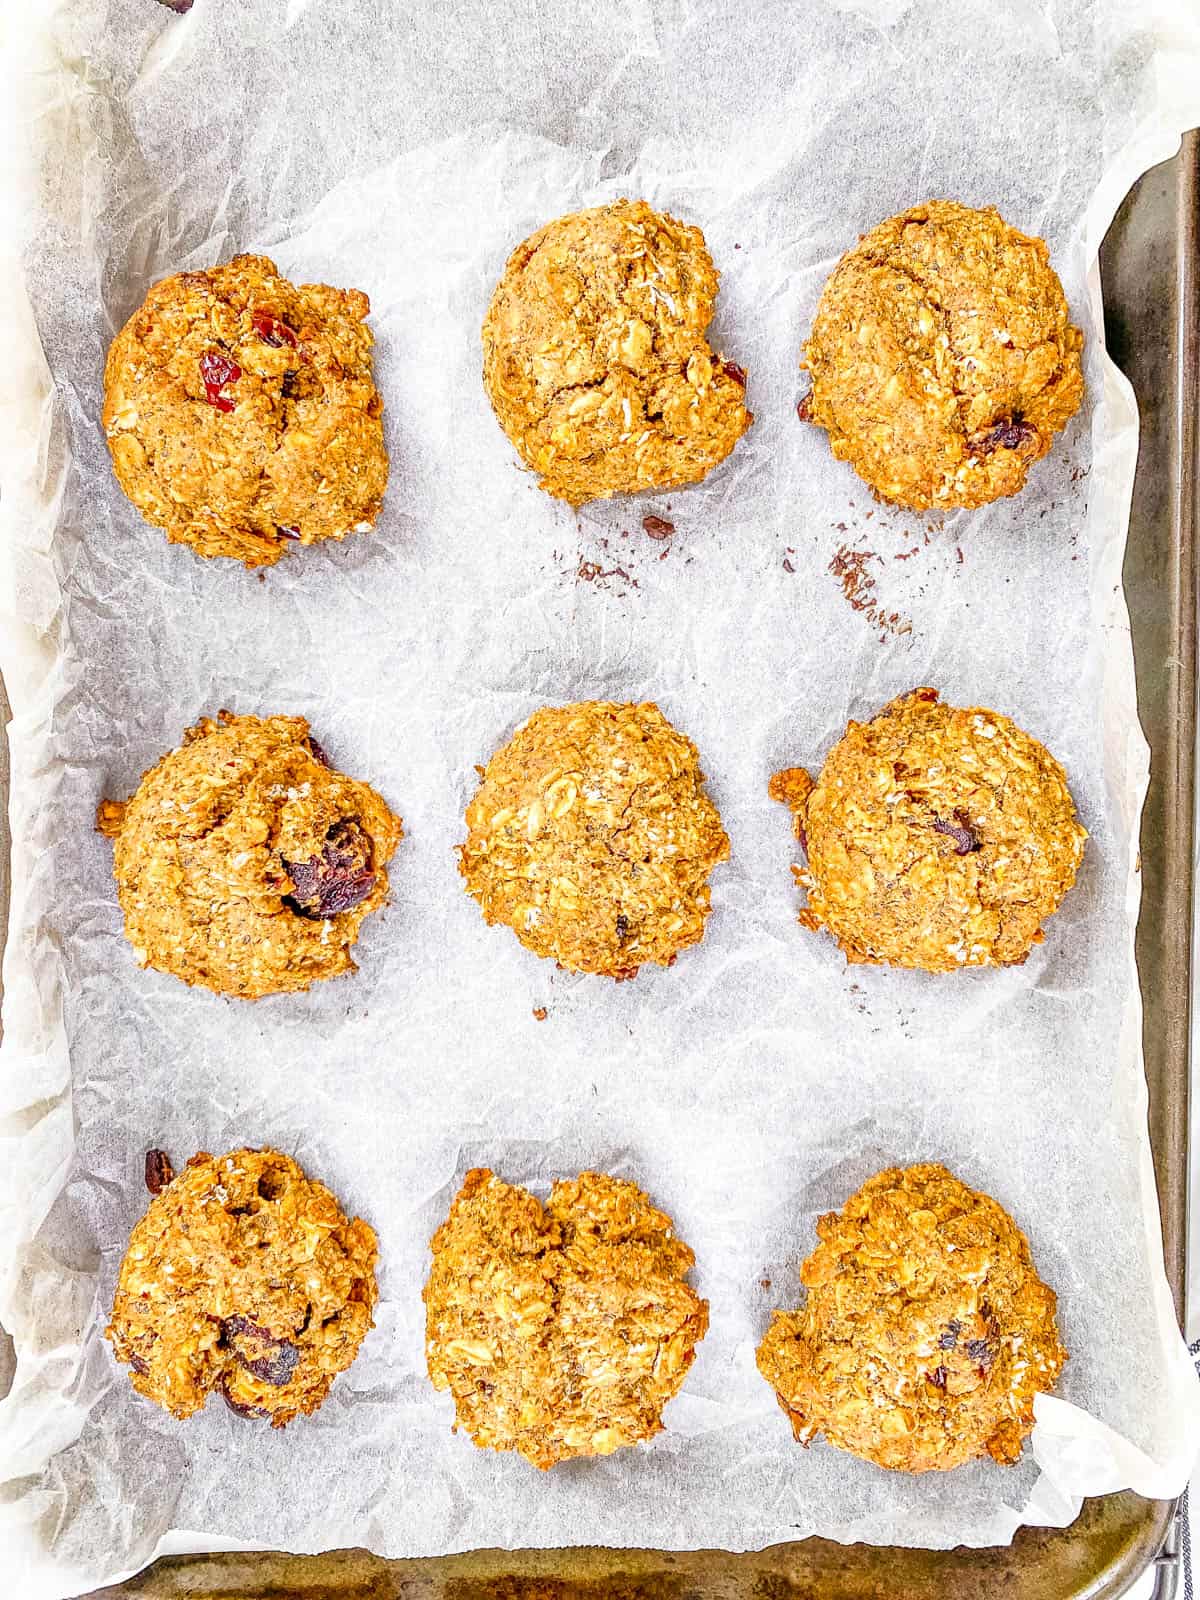 Low sugar vegan breakfast cookies on a baking sheet lined with parchment paper.